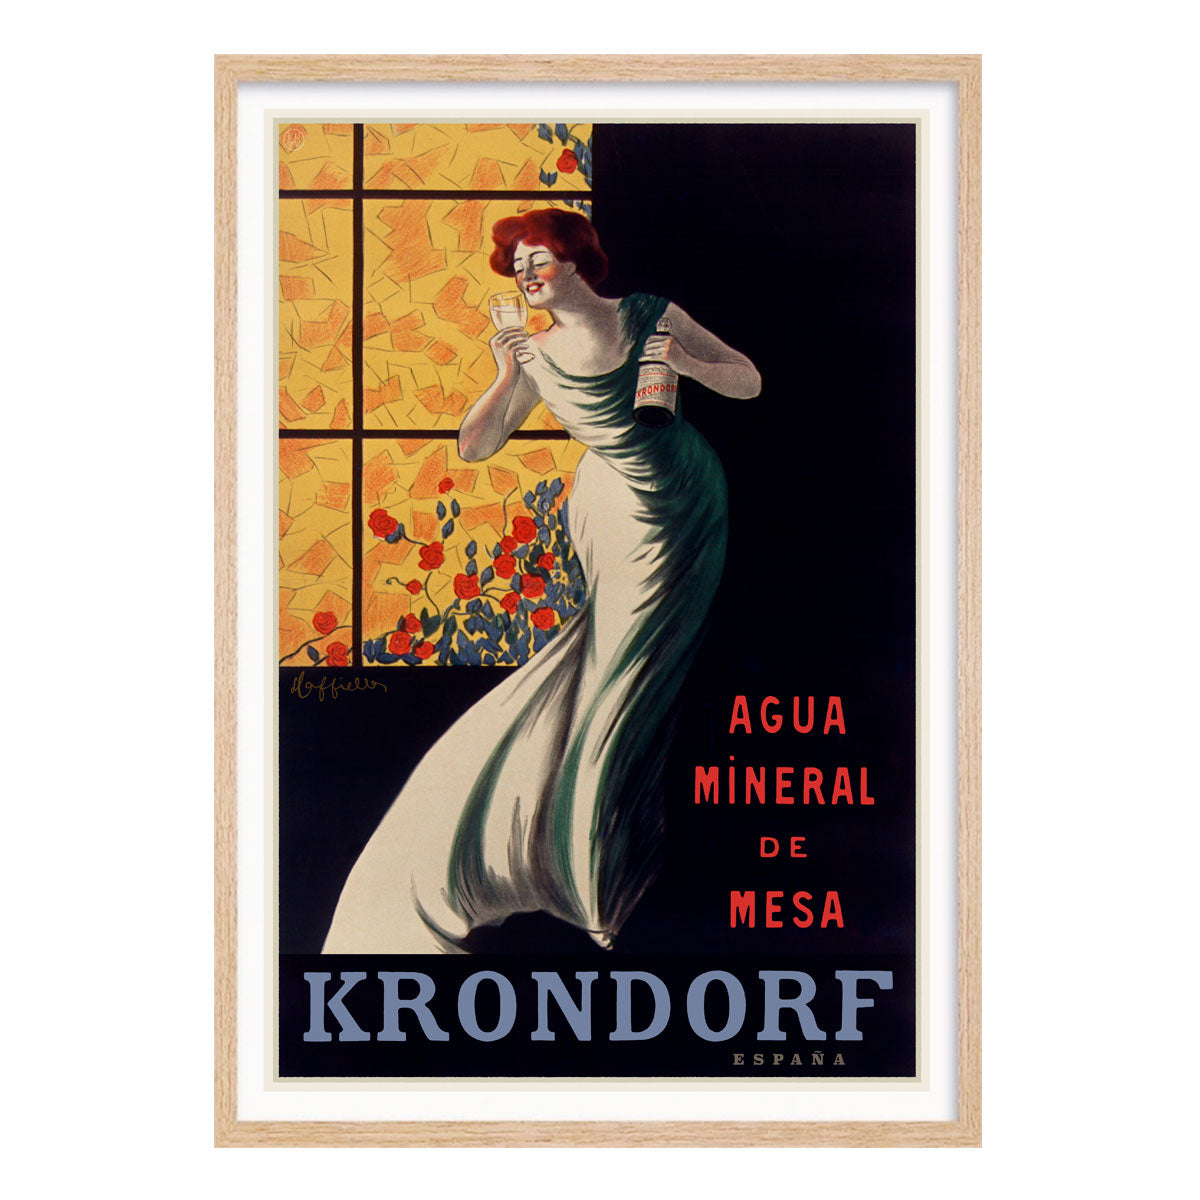 Krondorf retro vintage advertising poster print in oak frame from Places We Luv